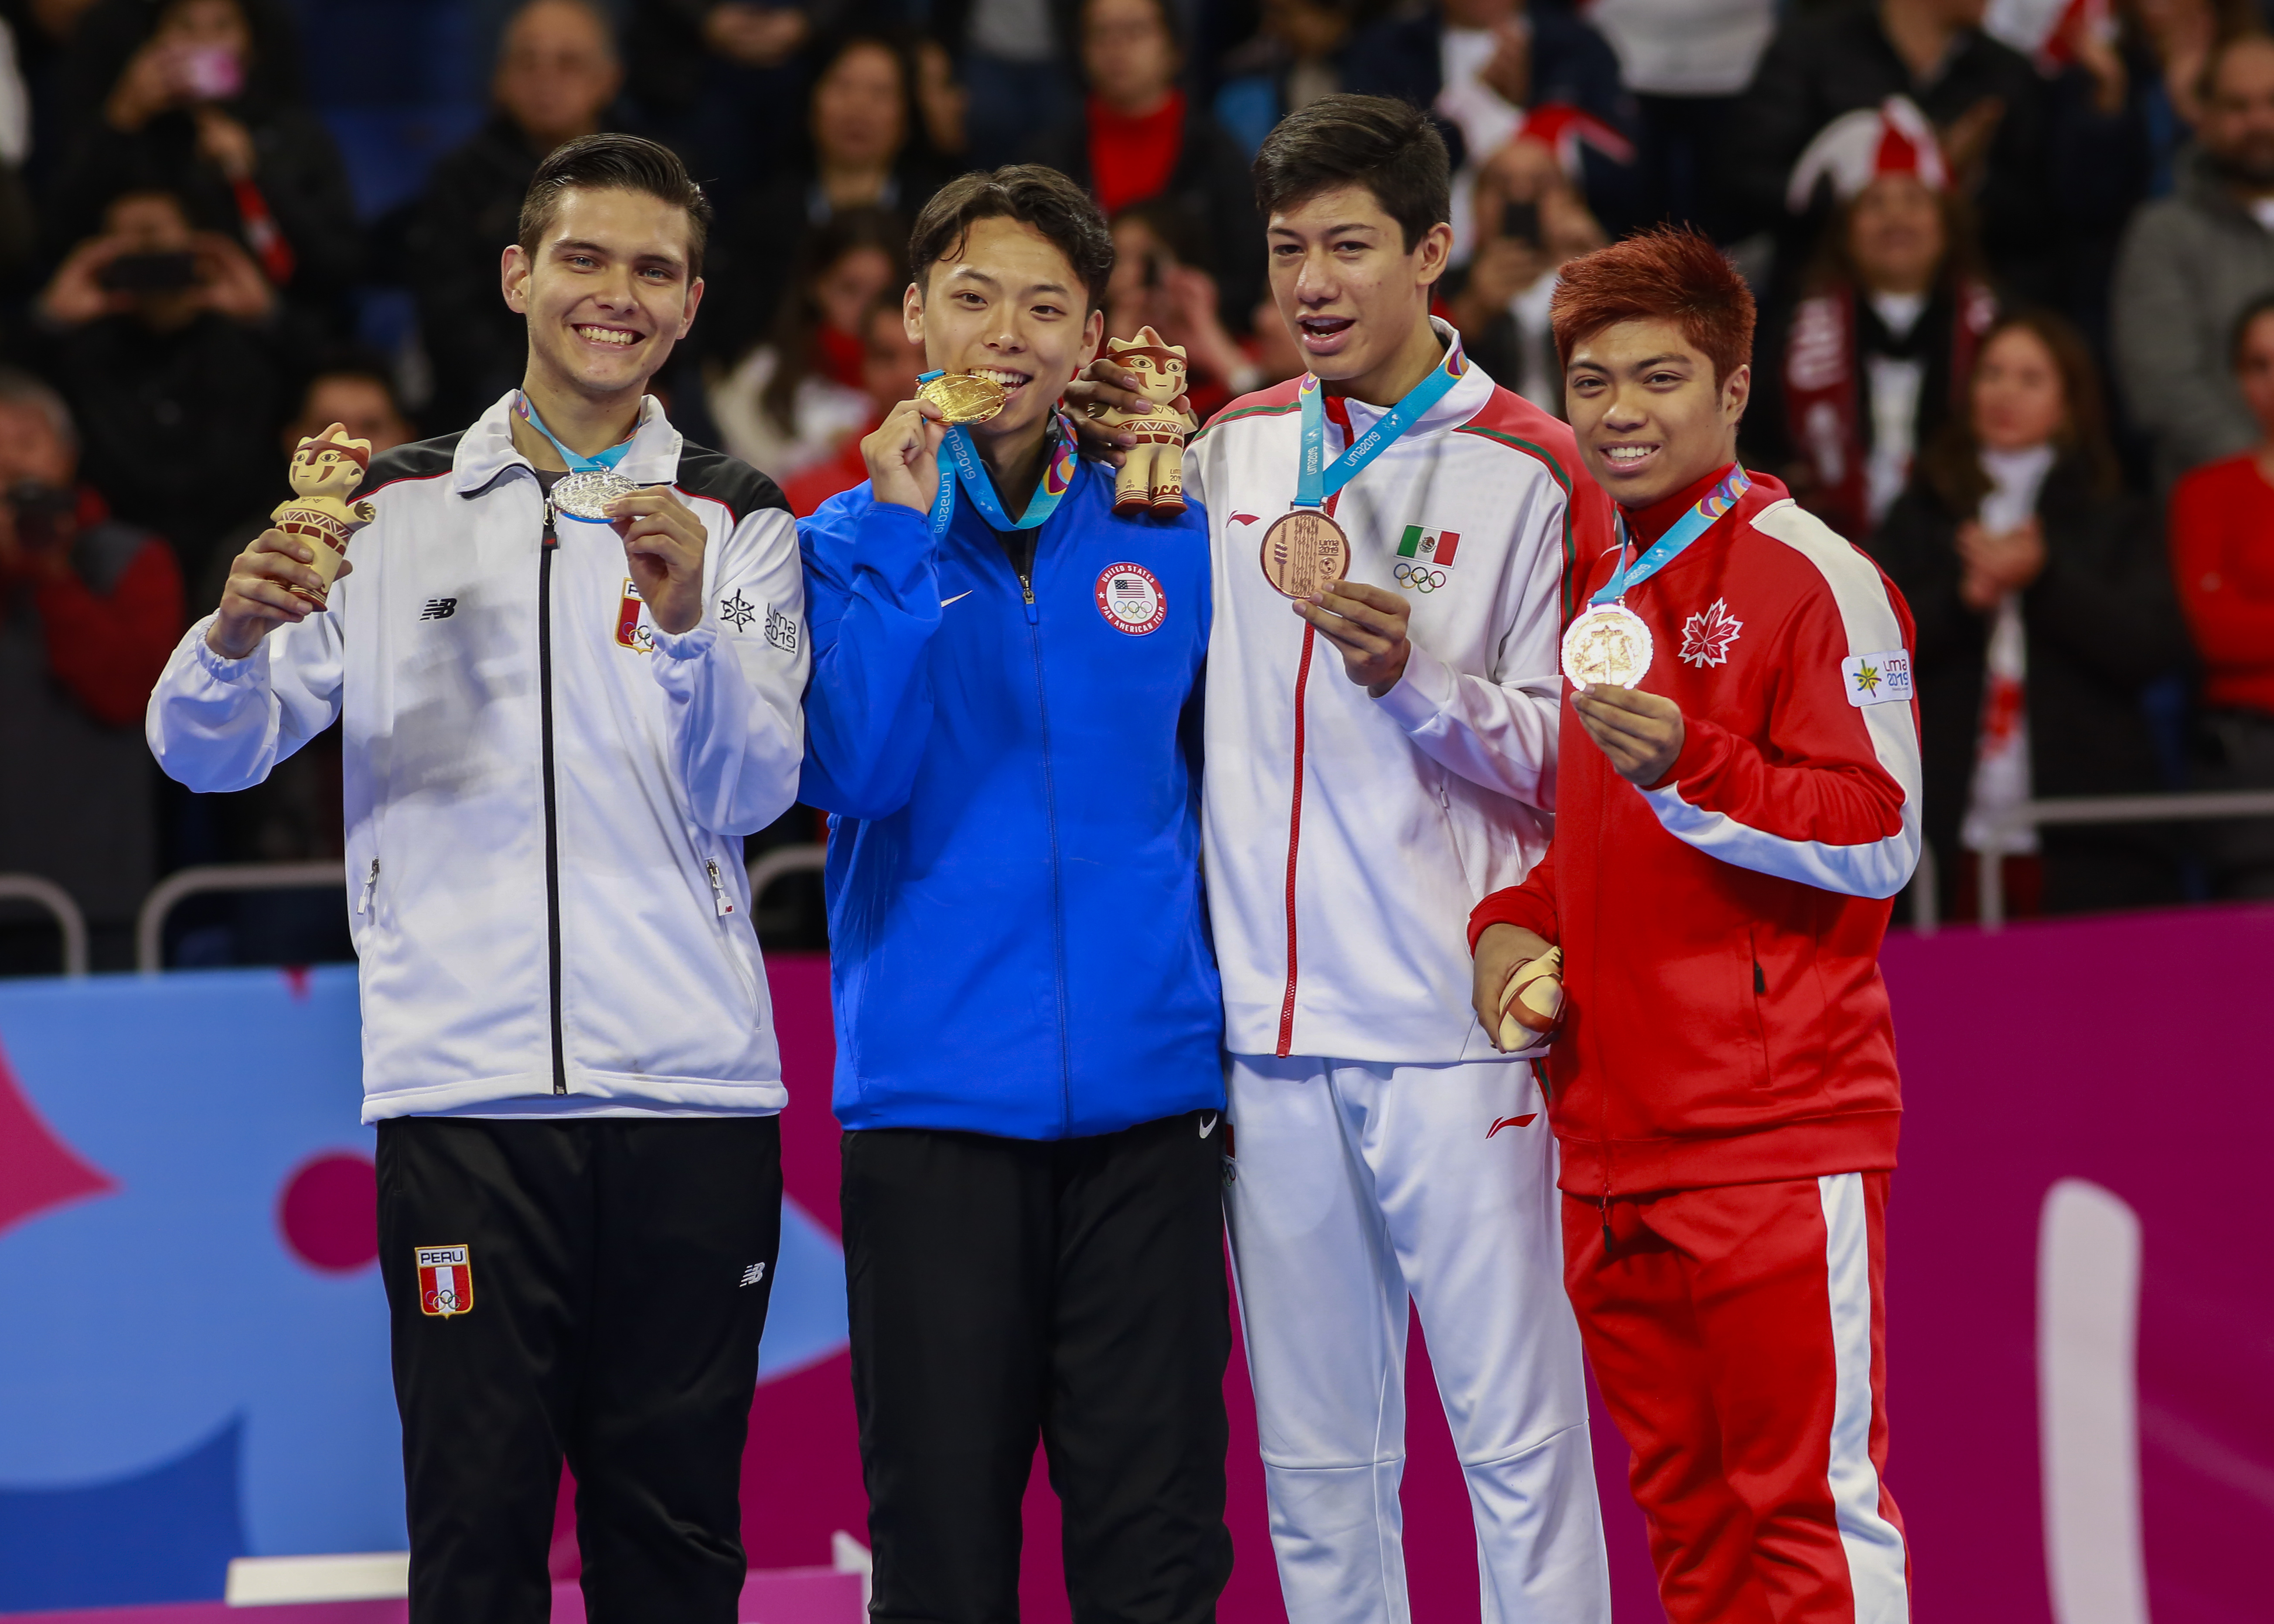 Hugo Castillo Peru ,left, holding the silver medal, Alex Lee from USA, the winner of the Taekwondo competition together with Marco Arroyo from Mexico and J. Abbas Assadian from Canada 